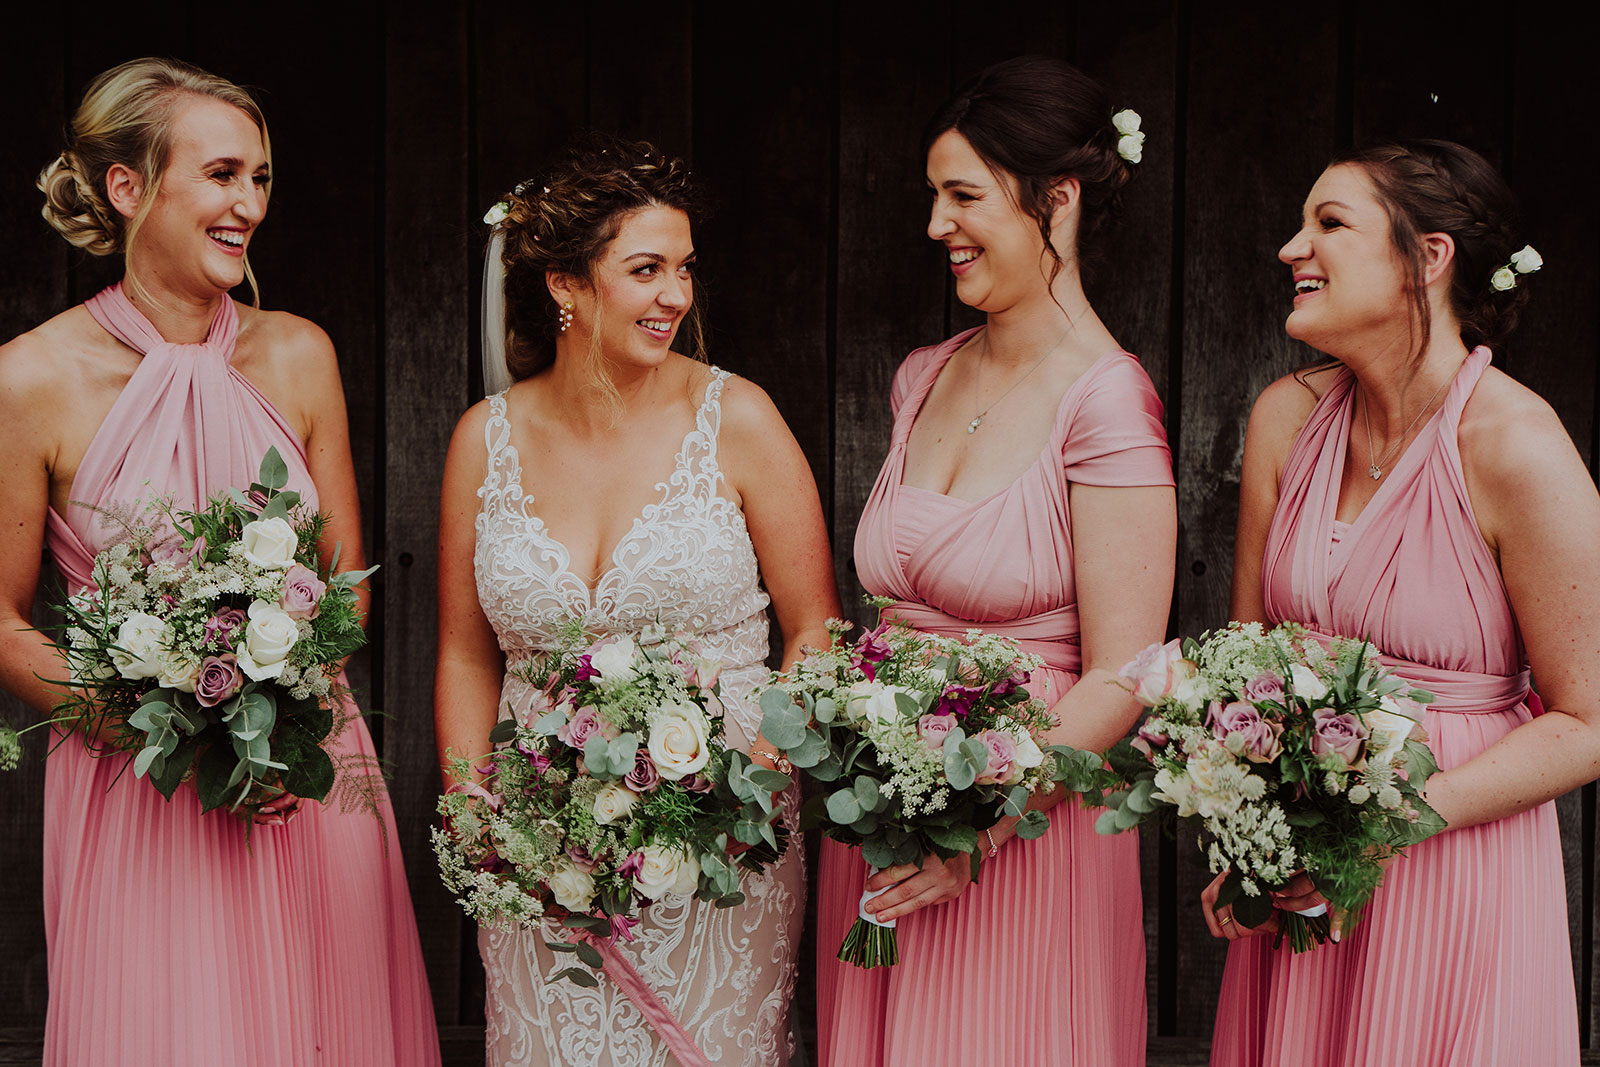  Bridesmaids in pink wedding dresses all of different styles - Get Married in Cornwall with eeek!